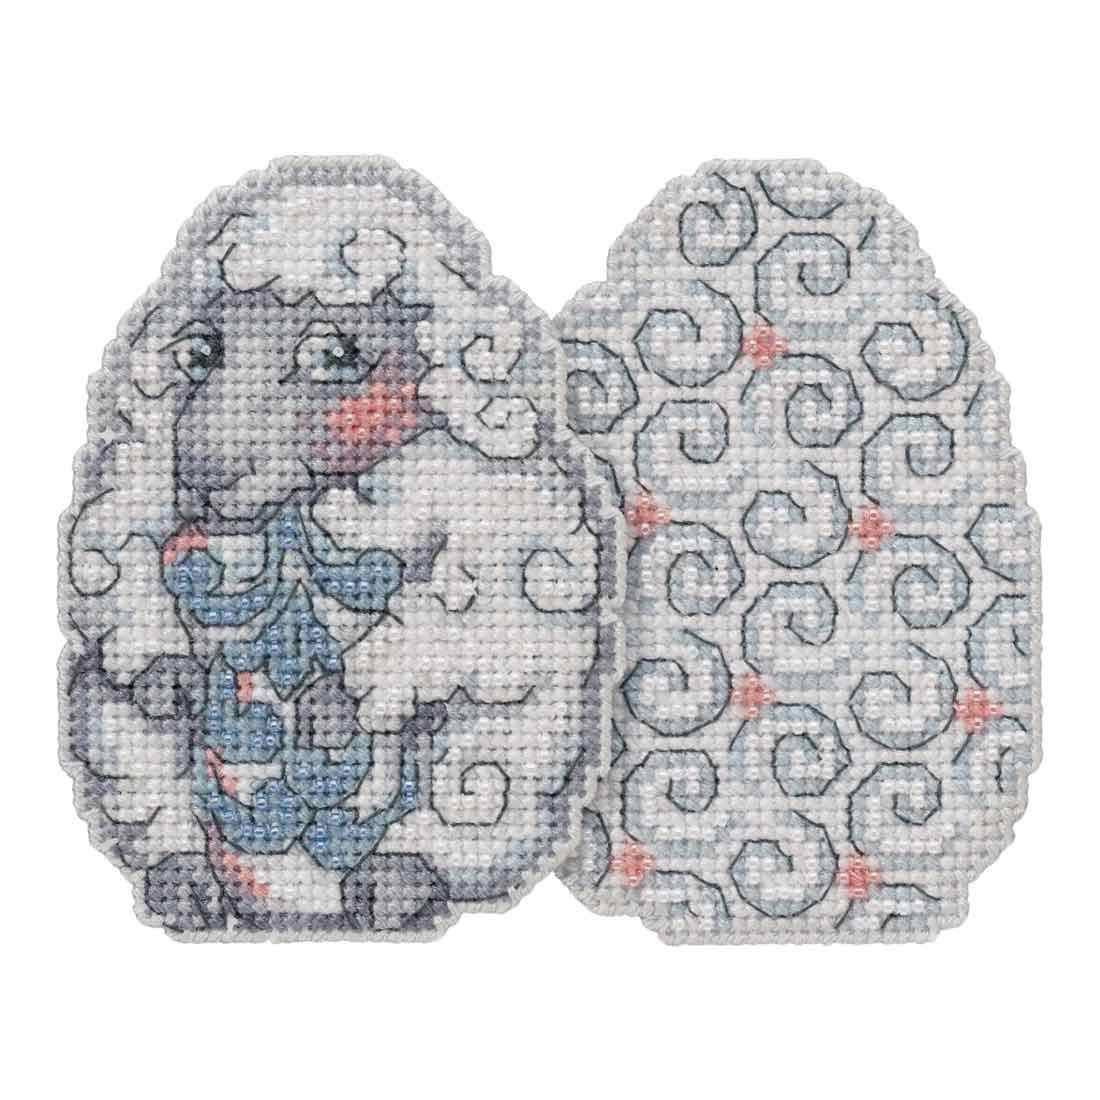 Sheep Egg Beaded Counted Cross Stitch Easter Ornament Kit Mill Hill 2018 Jim Shore Character Eggs JS181815